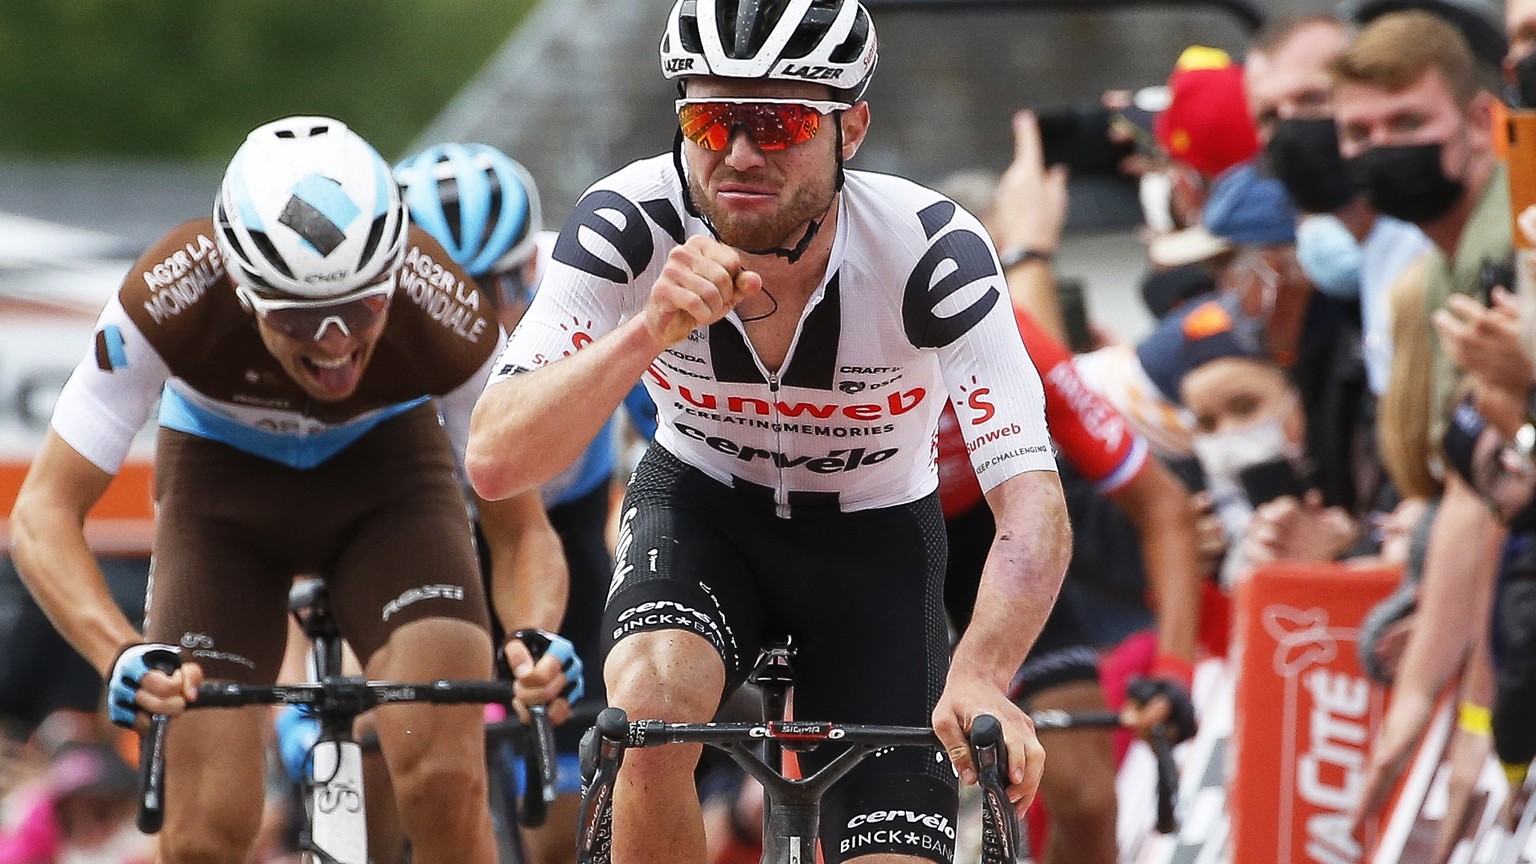 epa08708904 Swiss rider Marc Hirschi (C) of Team Sunweb celebrates while crossing the finish line to win the 84th edition of the Fleche Wallonne one day cycling race over 202km from Herve to Huy, Belg ...